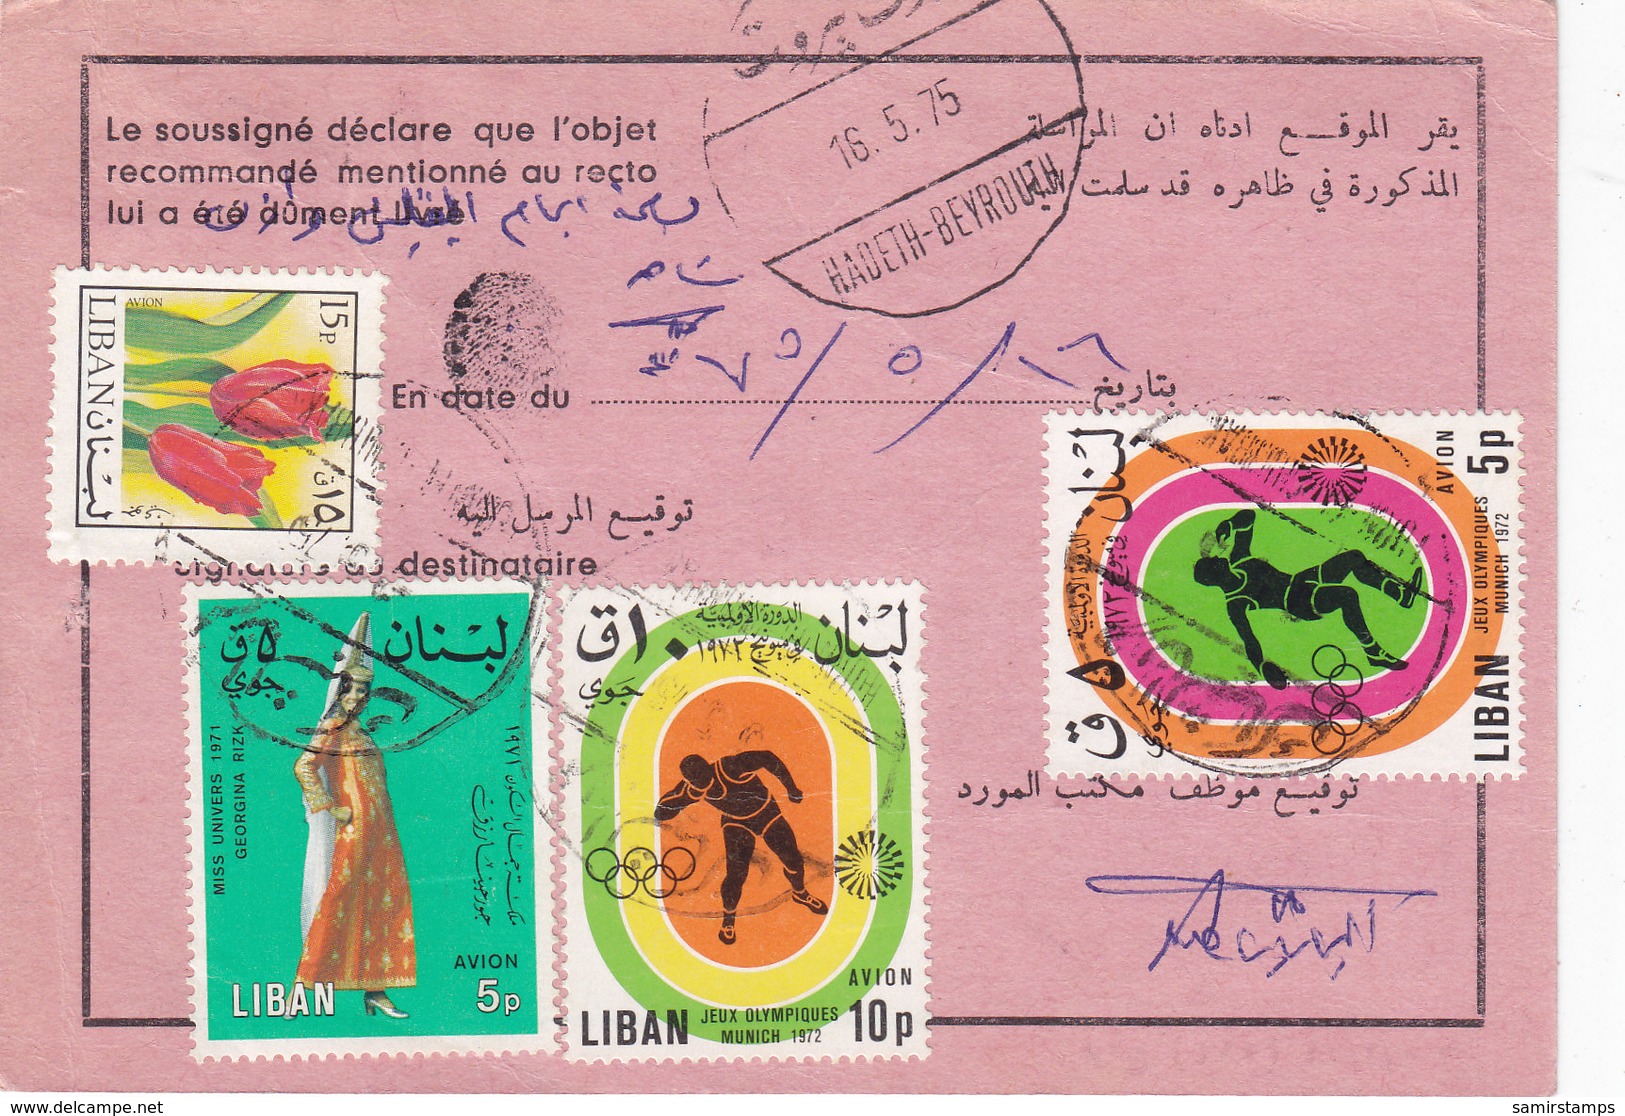 Lebanon-Liban Regsitr. Receipt Hadeth-Bey.,franked 4 Stamps 1975,scarce- Red. Price- SKRILL PAYMENT ONLY - Laos